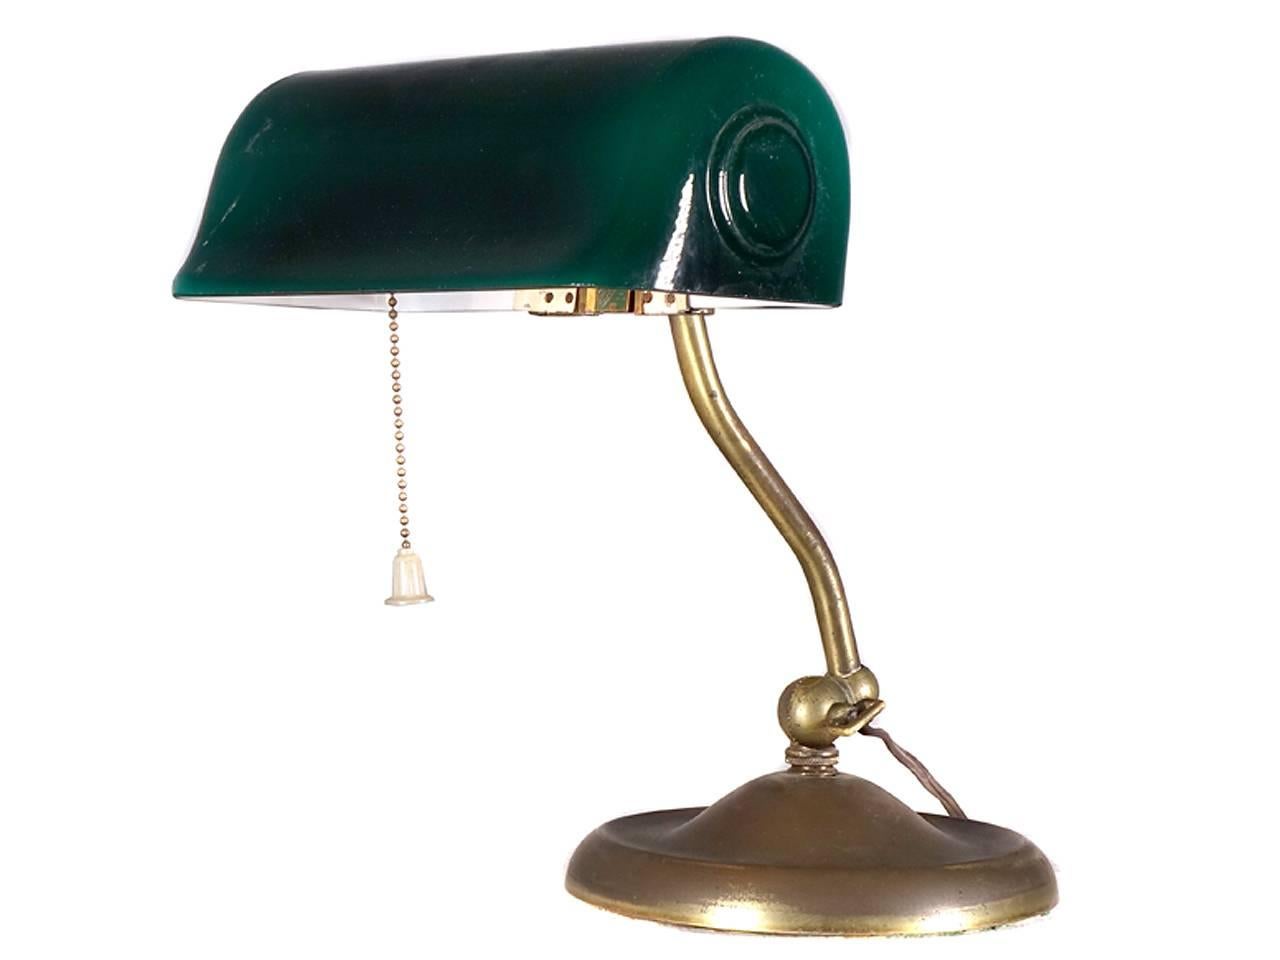 Signed by famous maker, Verdelite, Pat. May 8, 1917, this marvellous banker's desk lamp or piano lamp has an original emerald green blown glass shade. The name is from the verdelite tourmaline gemstone, the maker is Faries. This example is all